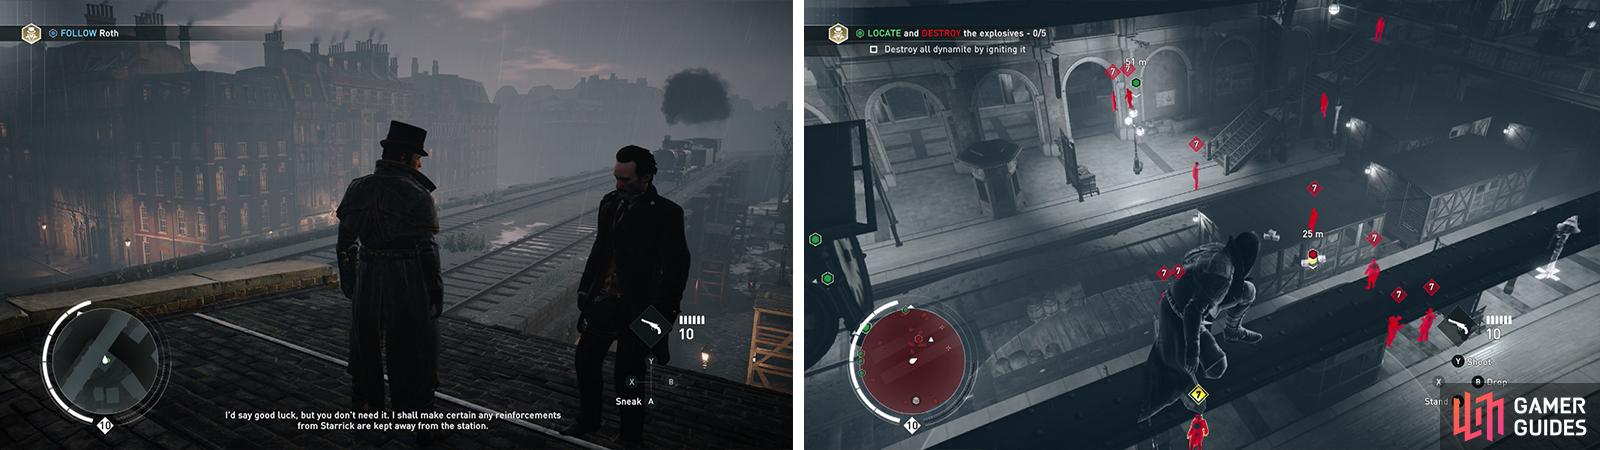 Hop onto the train as it goes past (left) to enter the station. Use Eagle Vision to tag the enemies in the station (right).